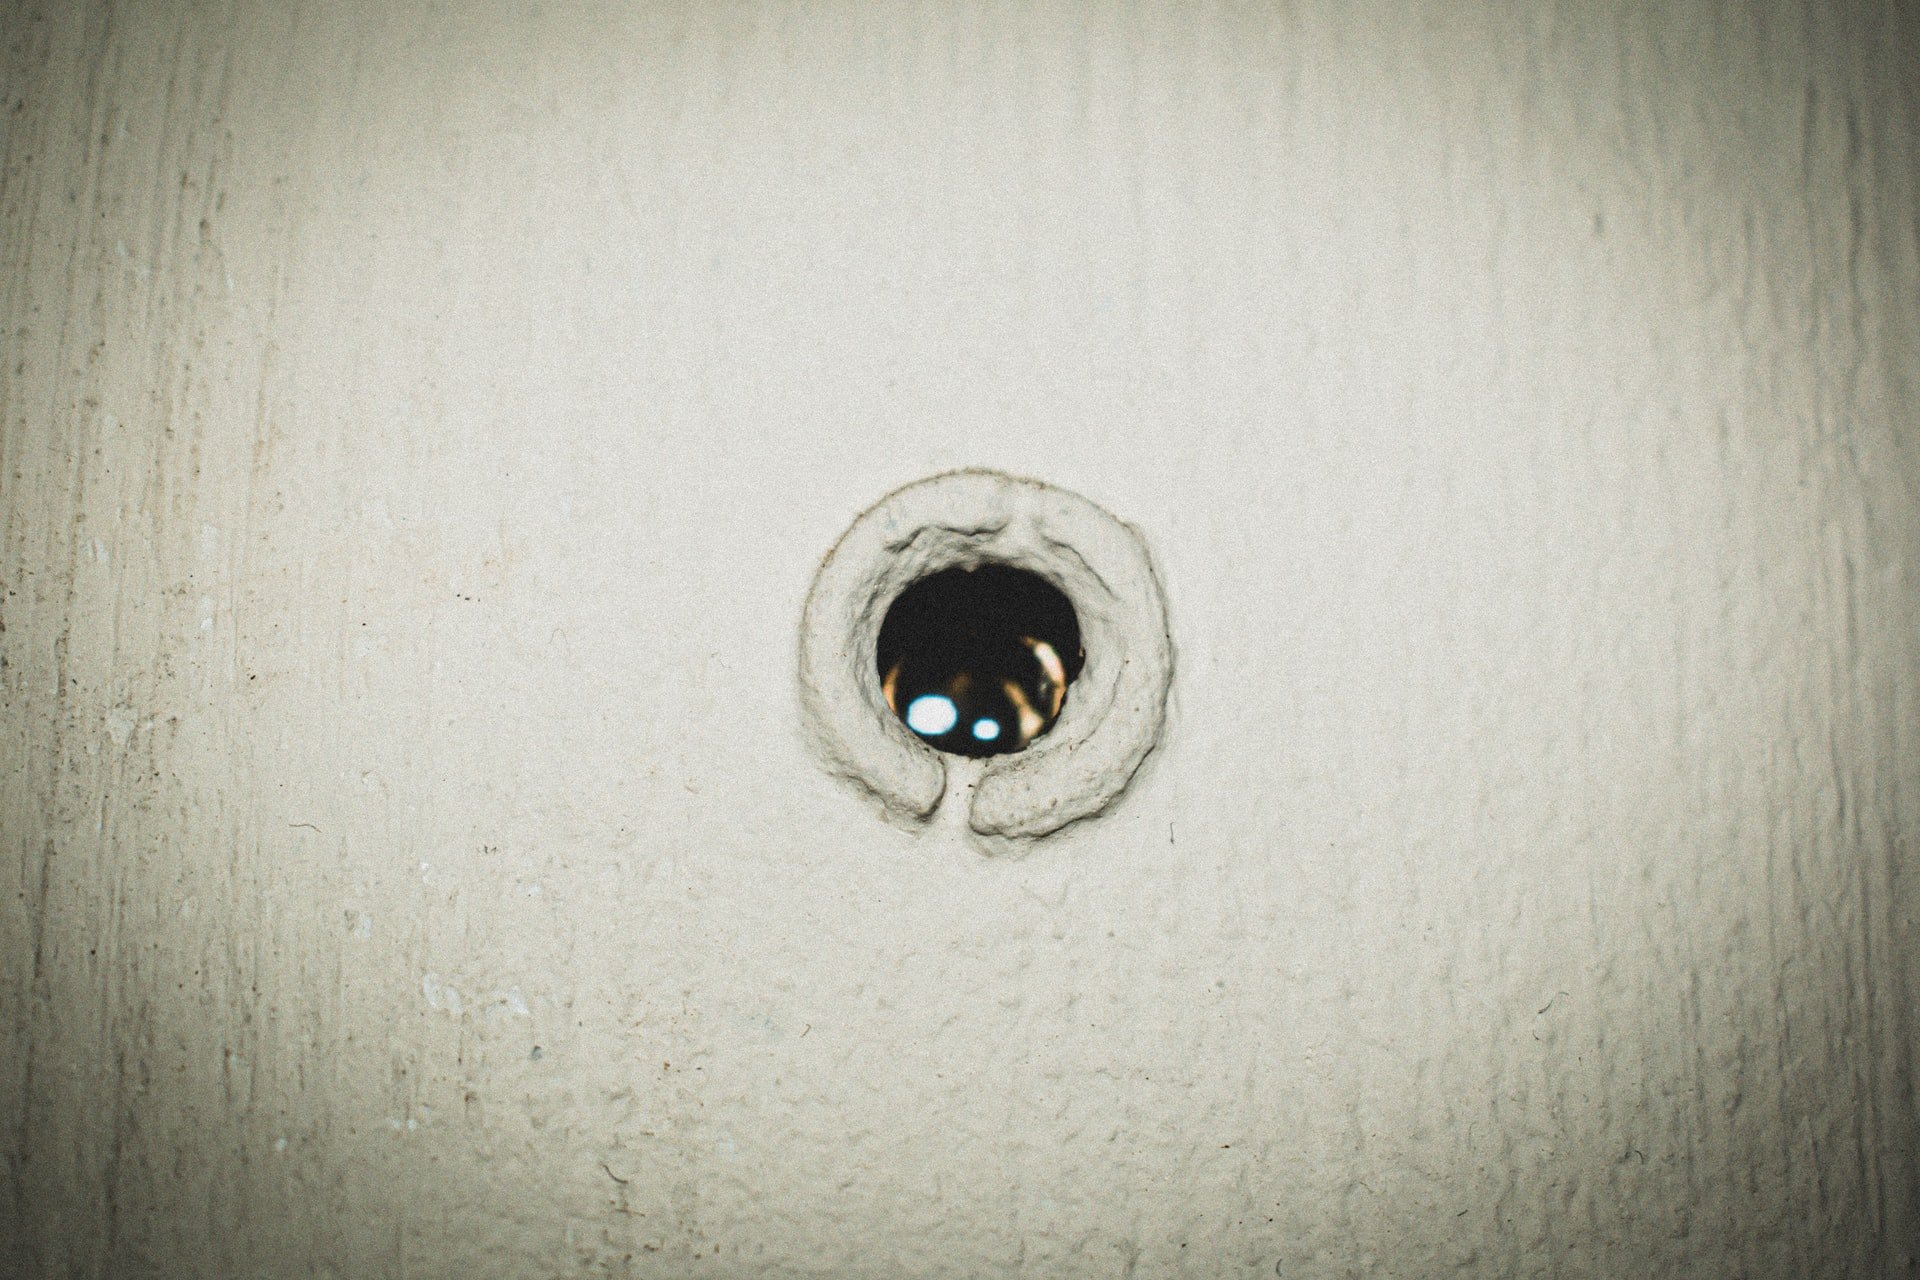 OP's father recognized their neighbor's face through the peephole. | Source: Unsplash